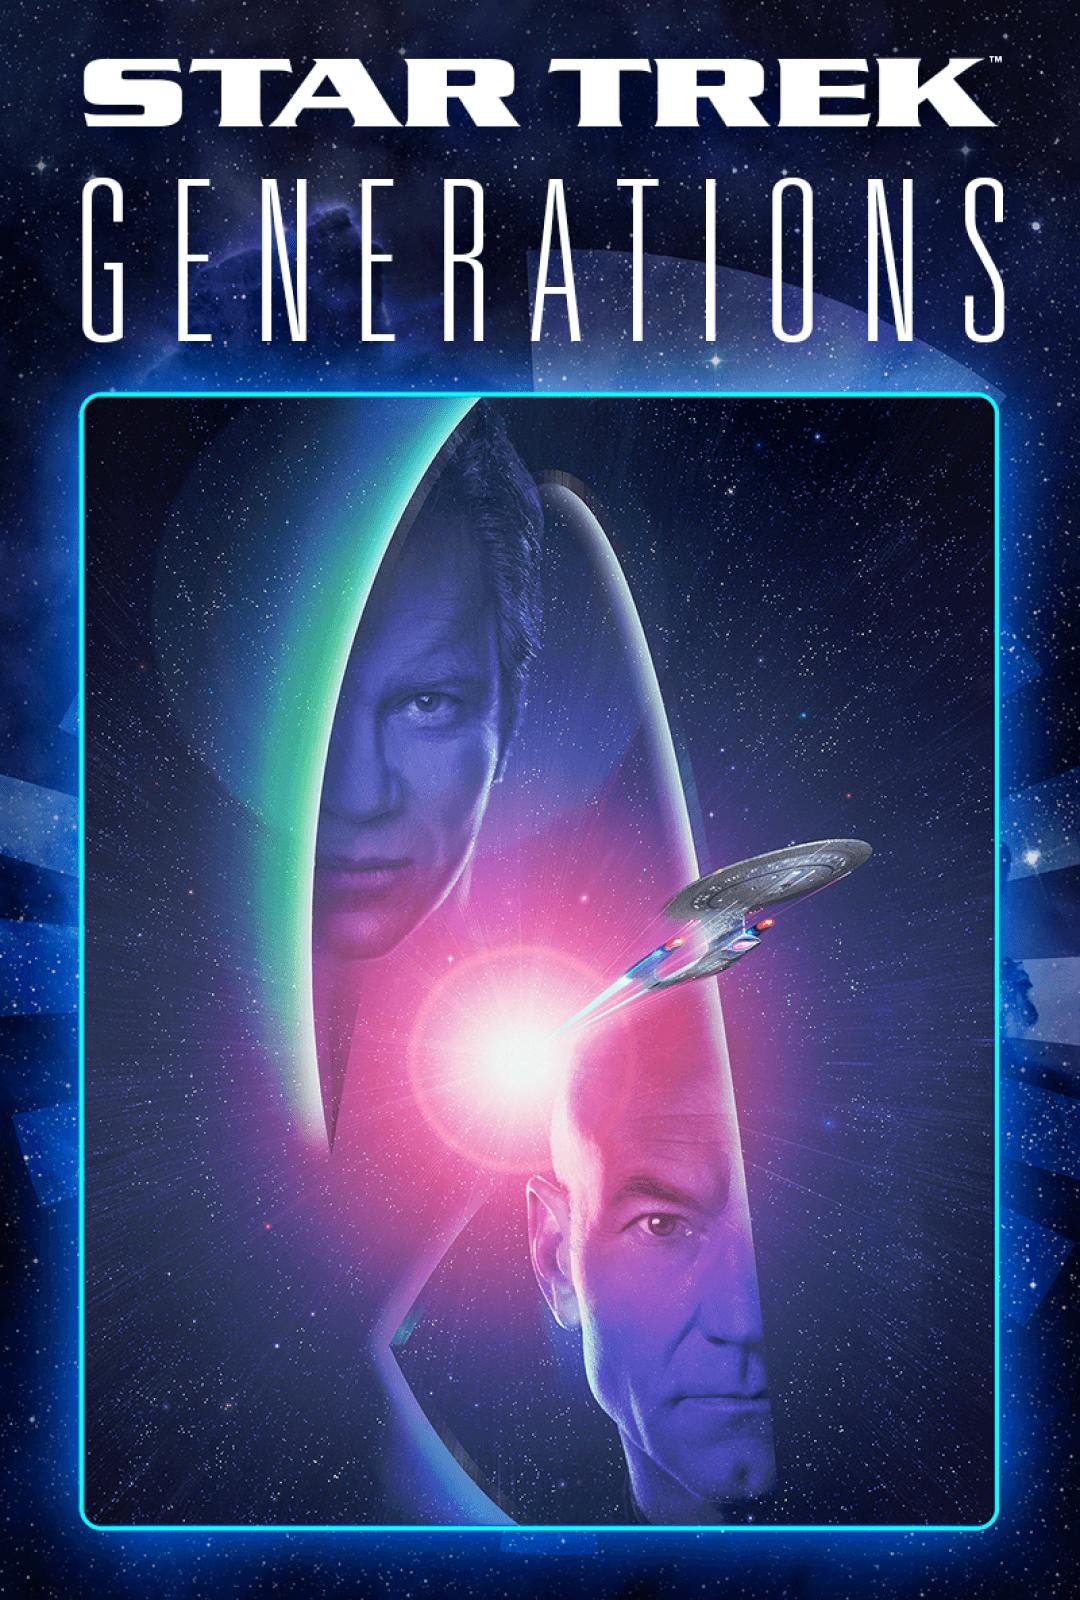 Poster art for Star Trek: Generations featuring James T. Kirk and Jean-Luc Picard